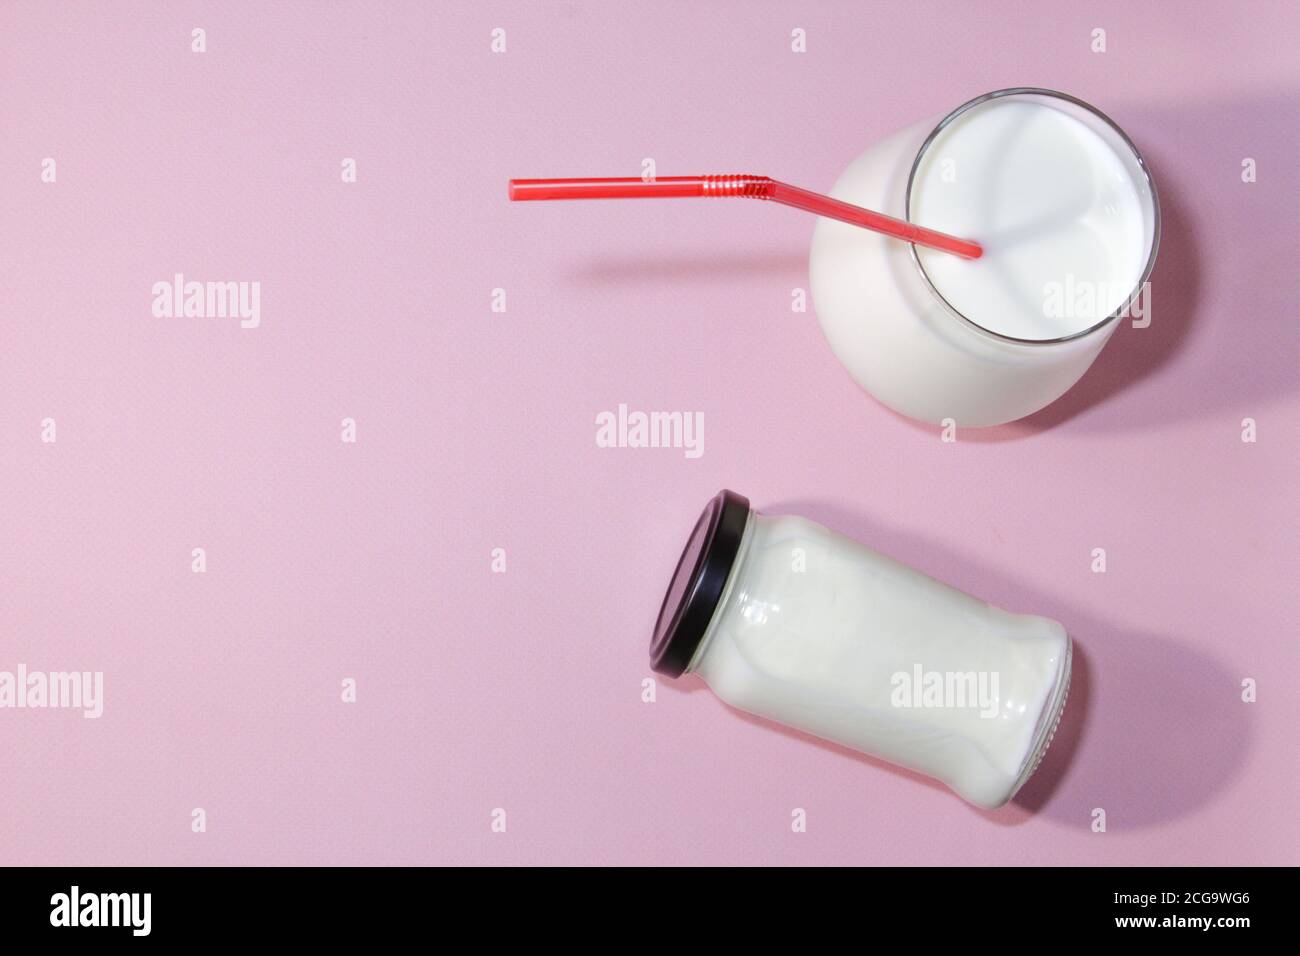 Airan or kefir drink, fermented milk drink, fermented probiotics on a pink background with copy space. Healthy food concept. Top view. Stock Photo